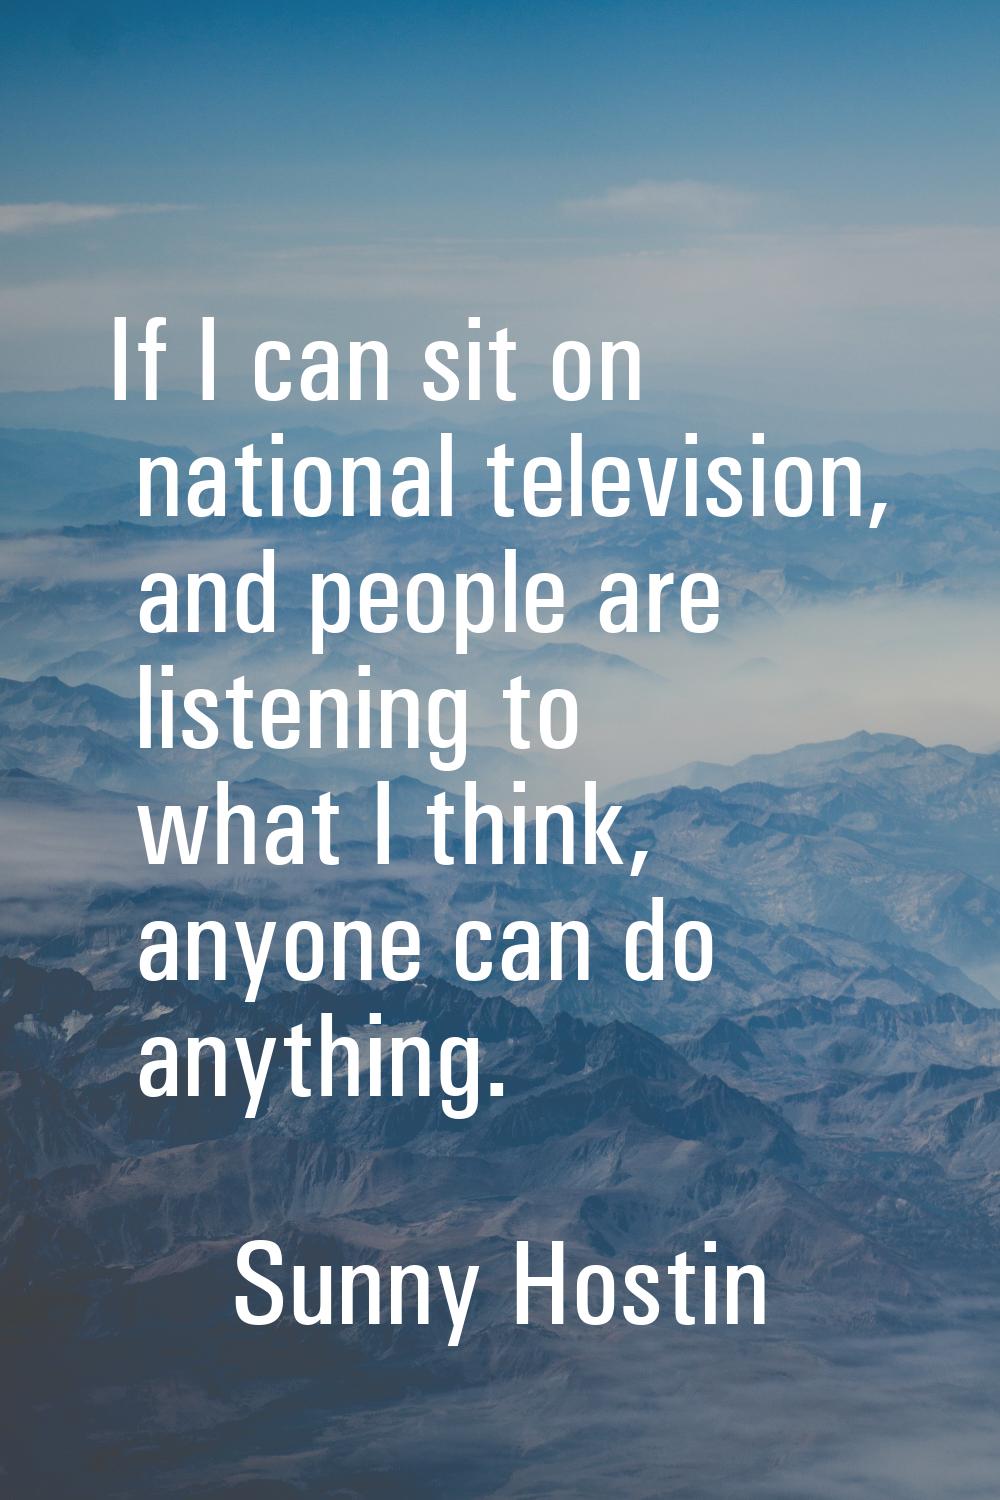 If I can sit on national television, and people are listening to what I think, anyone can do anythi